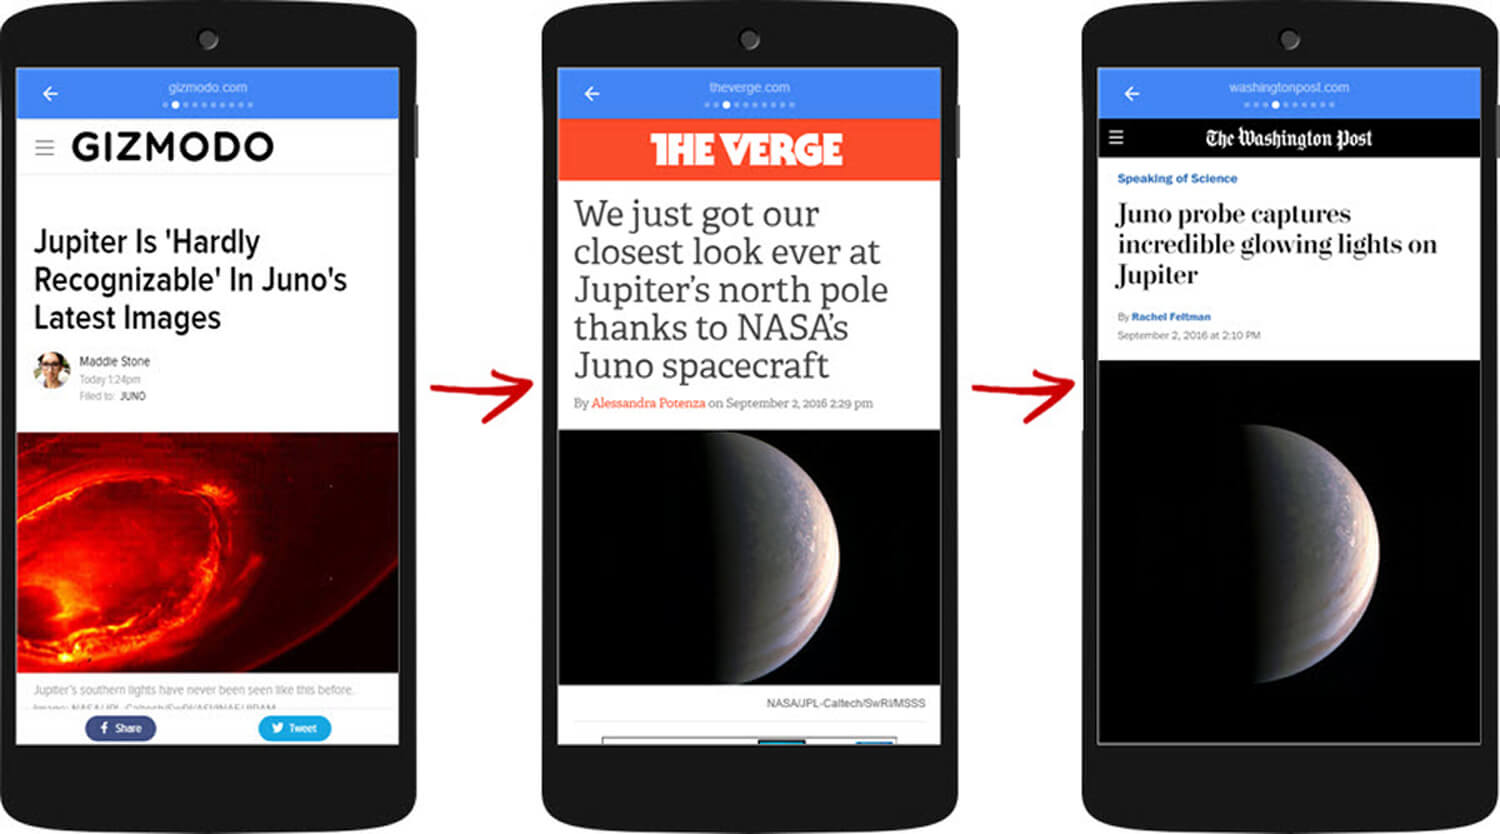 Users swipe through content from multiple publishers in Google’s Top Stories AMP viewer.